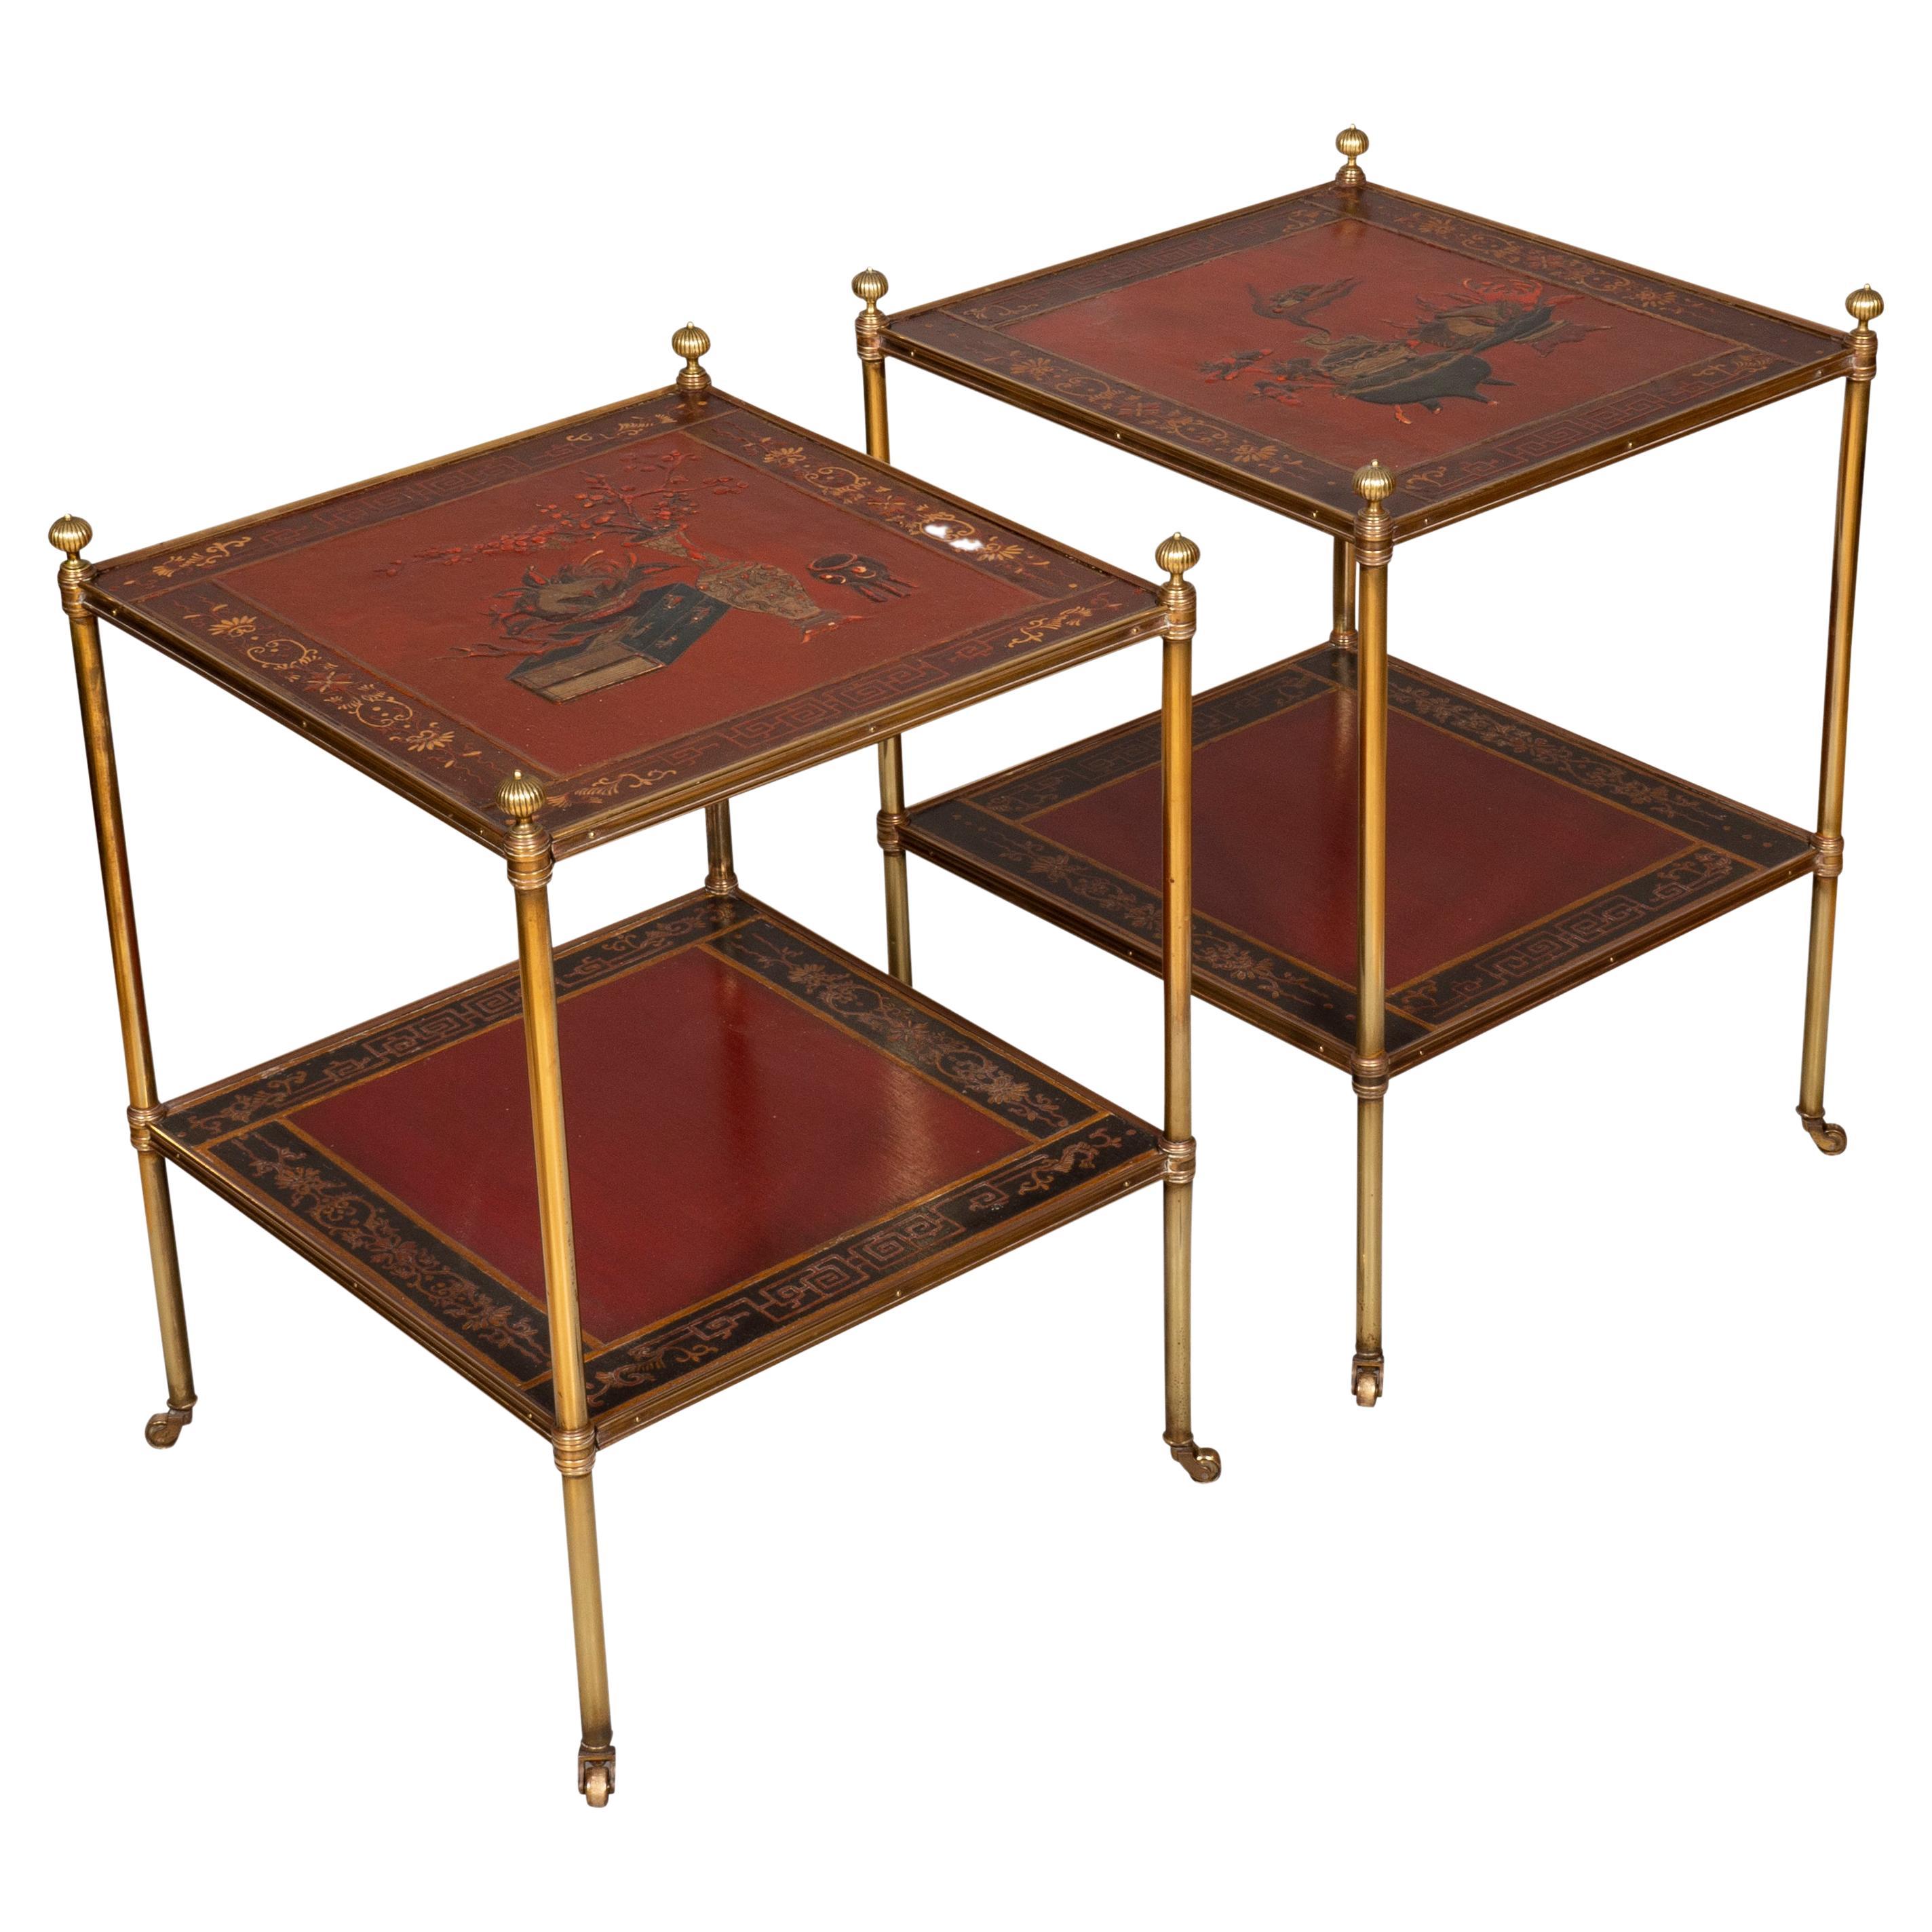 Wonderful red lacquer Chinoiserie panels with tubular brass frame and legs. Casters. Possibly by Maletts London.